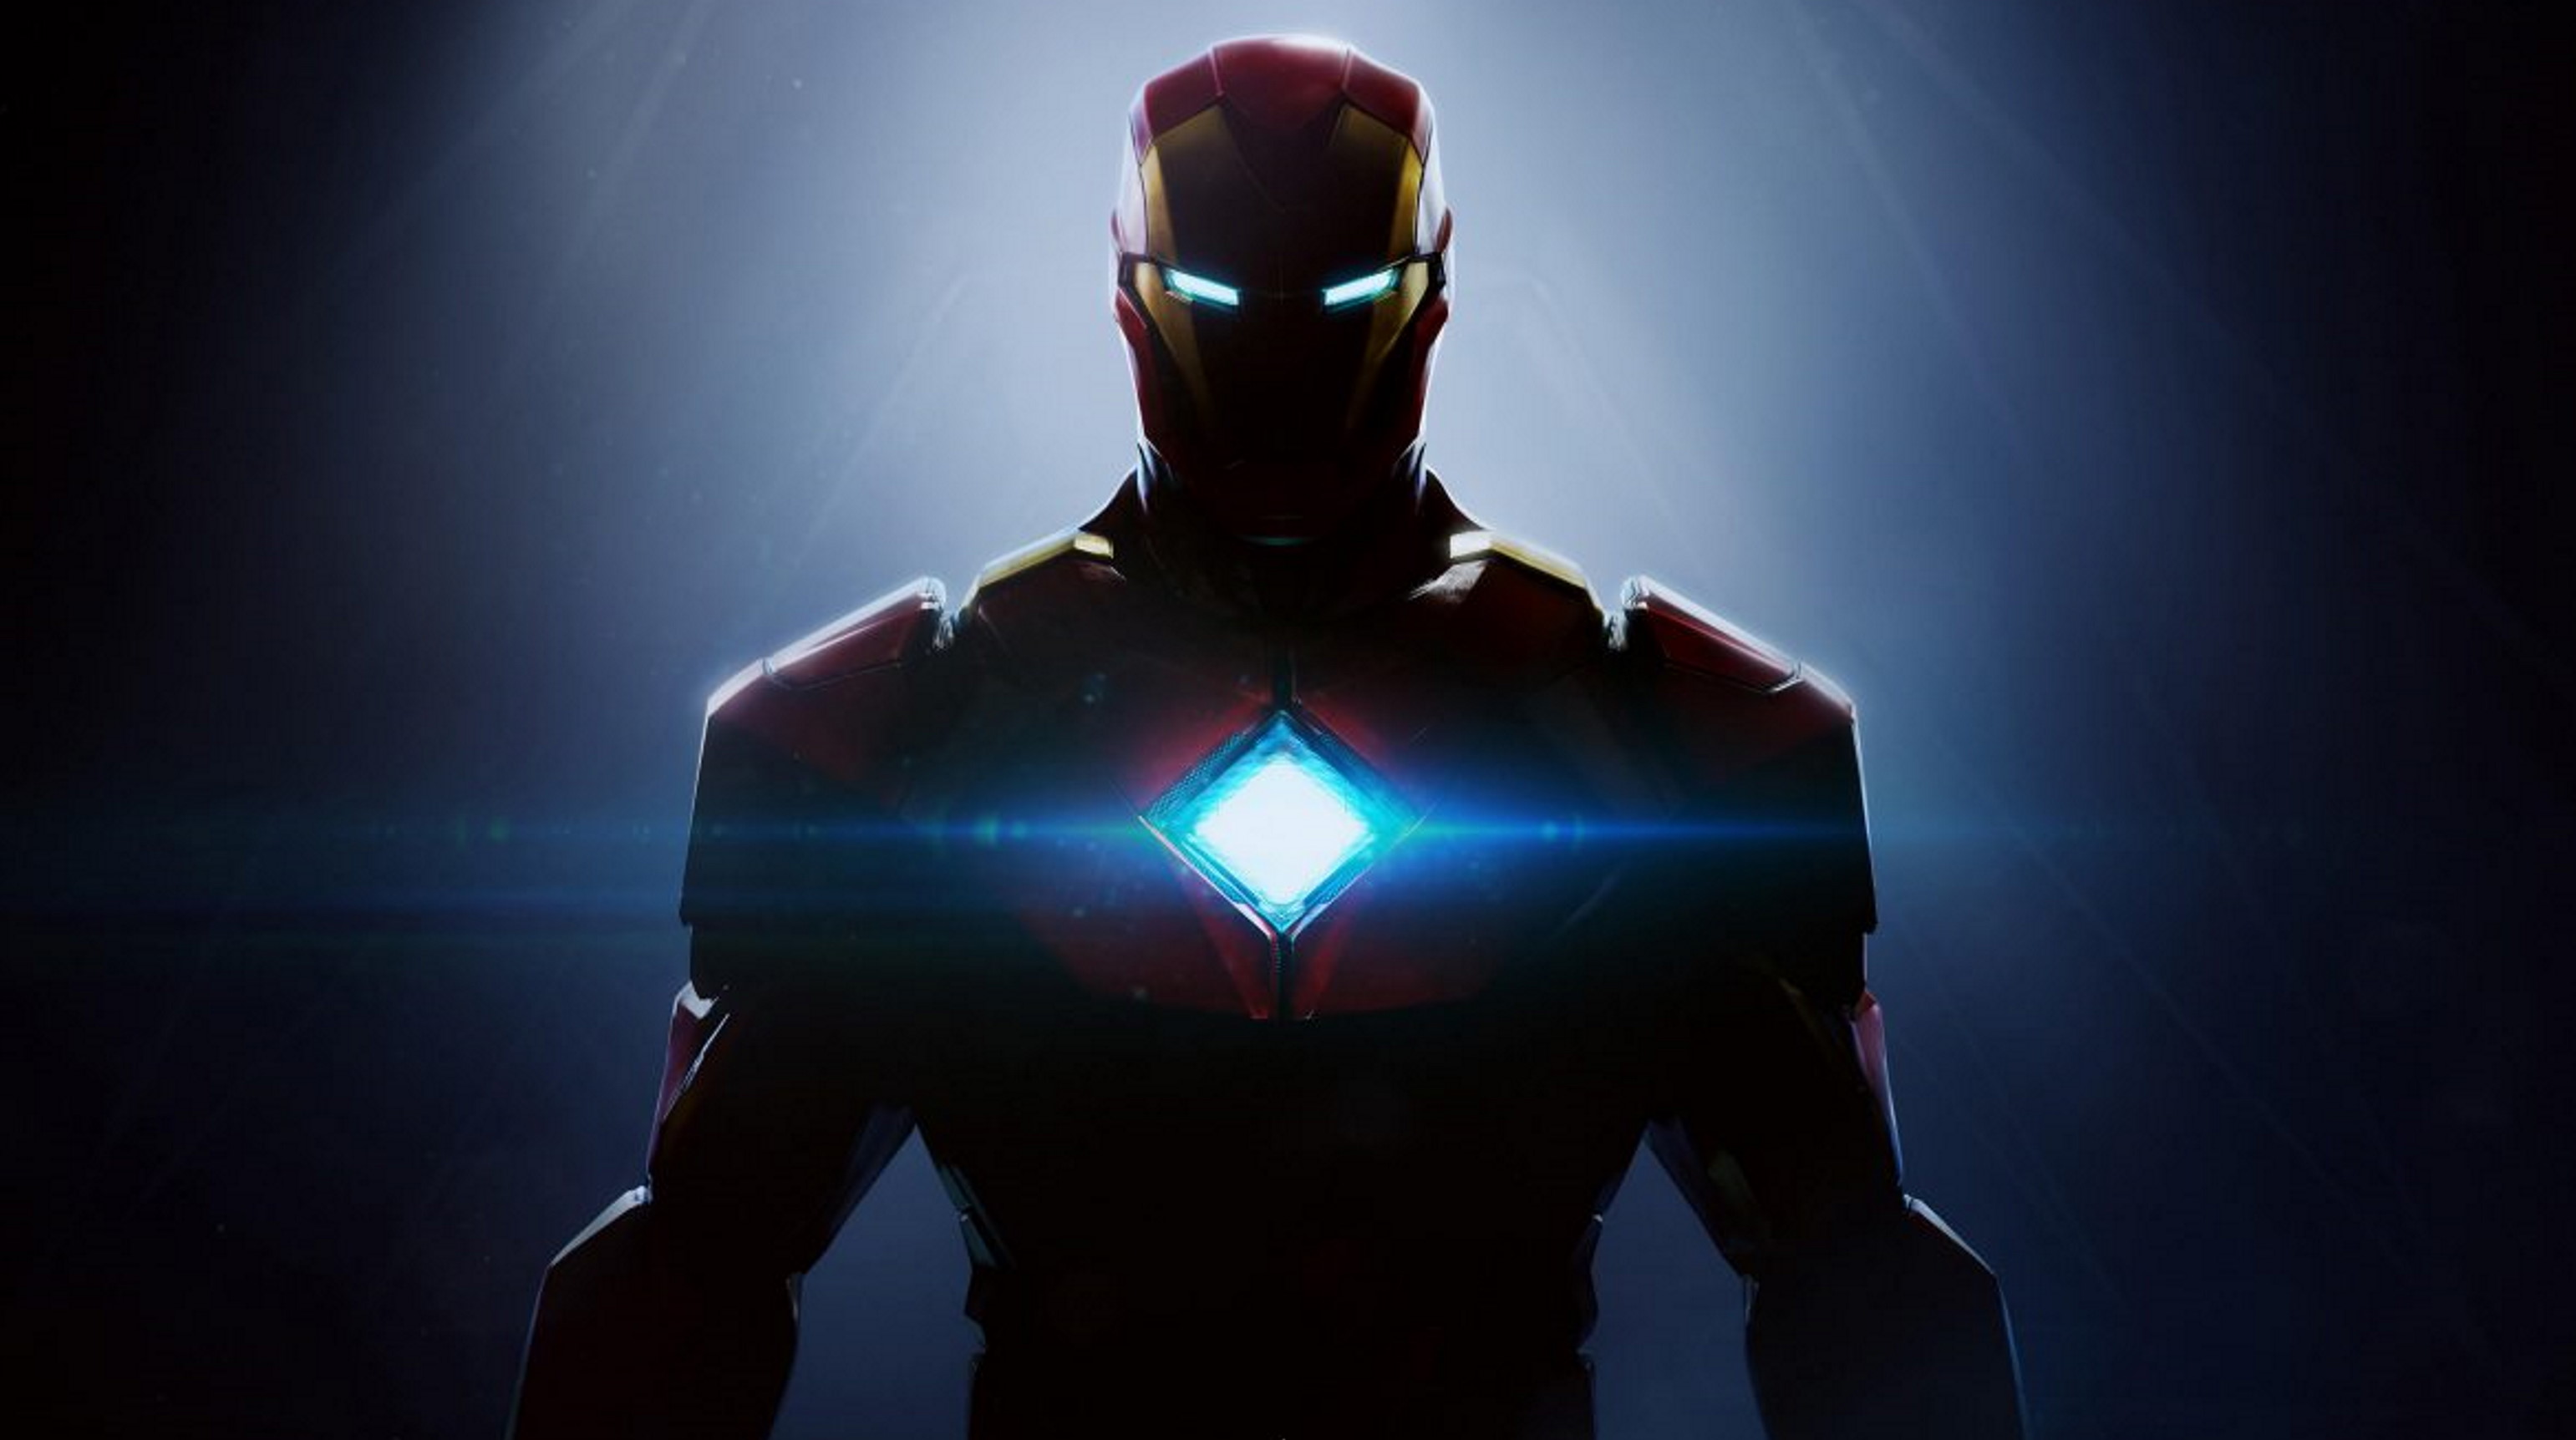 Electronic Arts unveils a new singleplayer Iron Man game